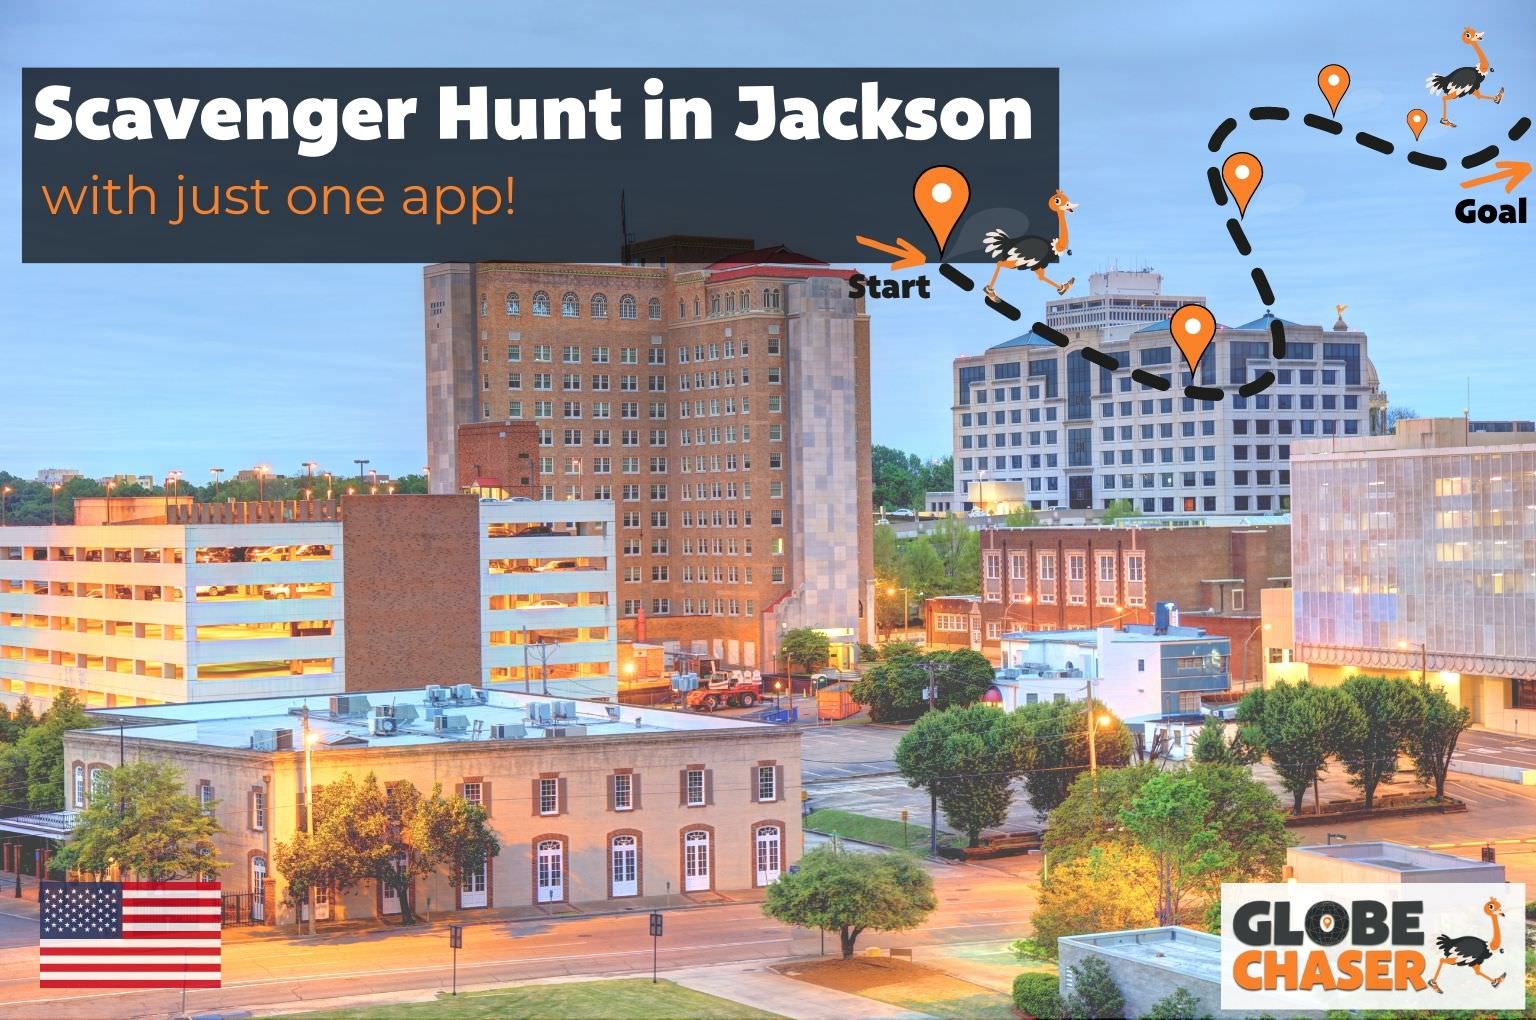 Scavenger Hunt in Jackson, USA - Family Activities with the Globe Chaser App for Outdoor Fun